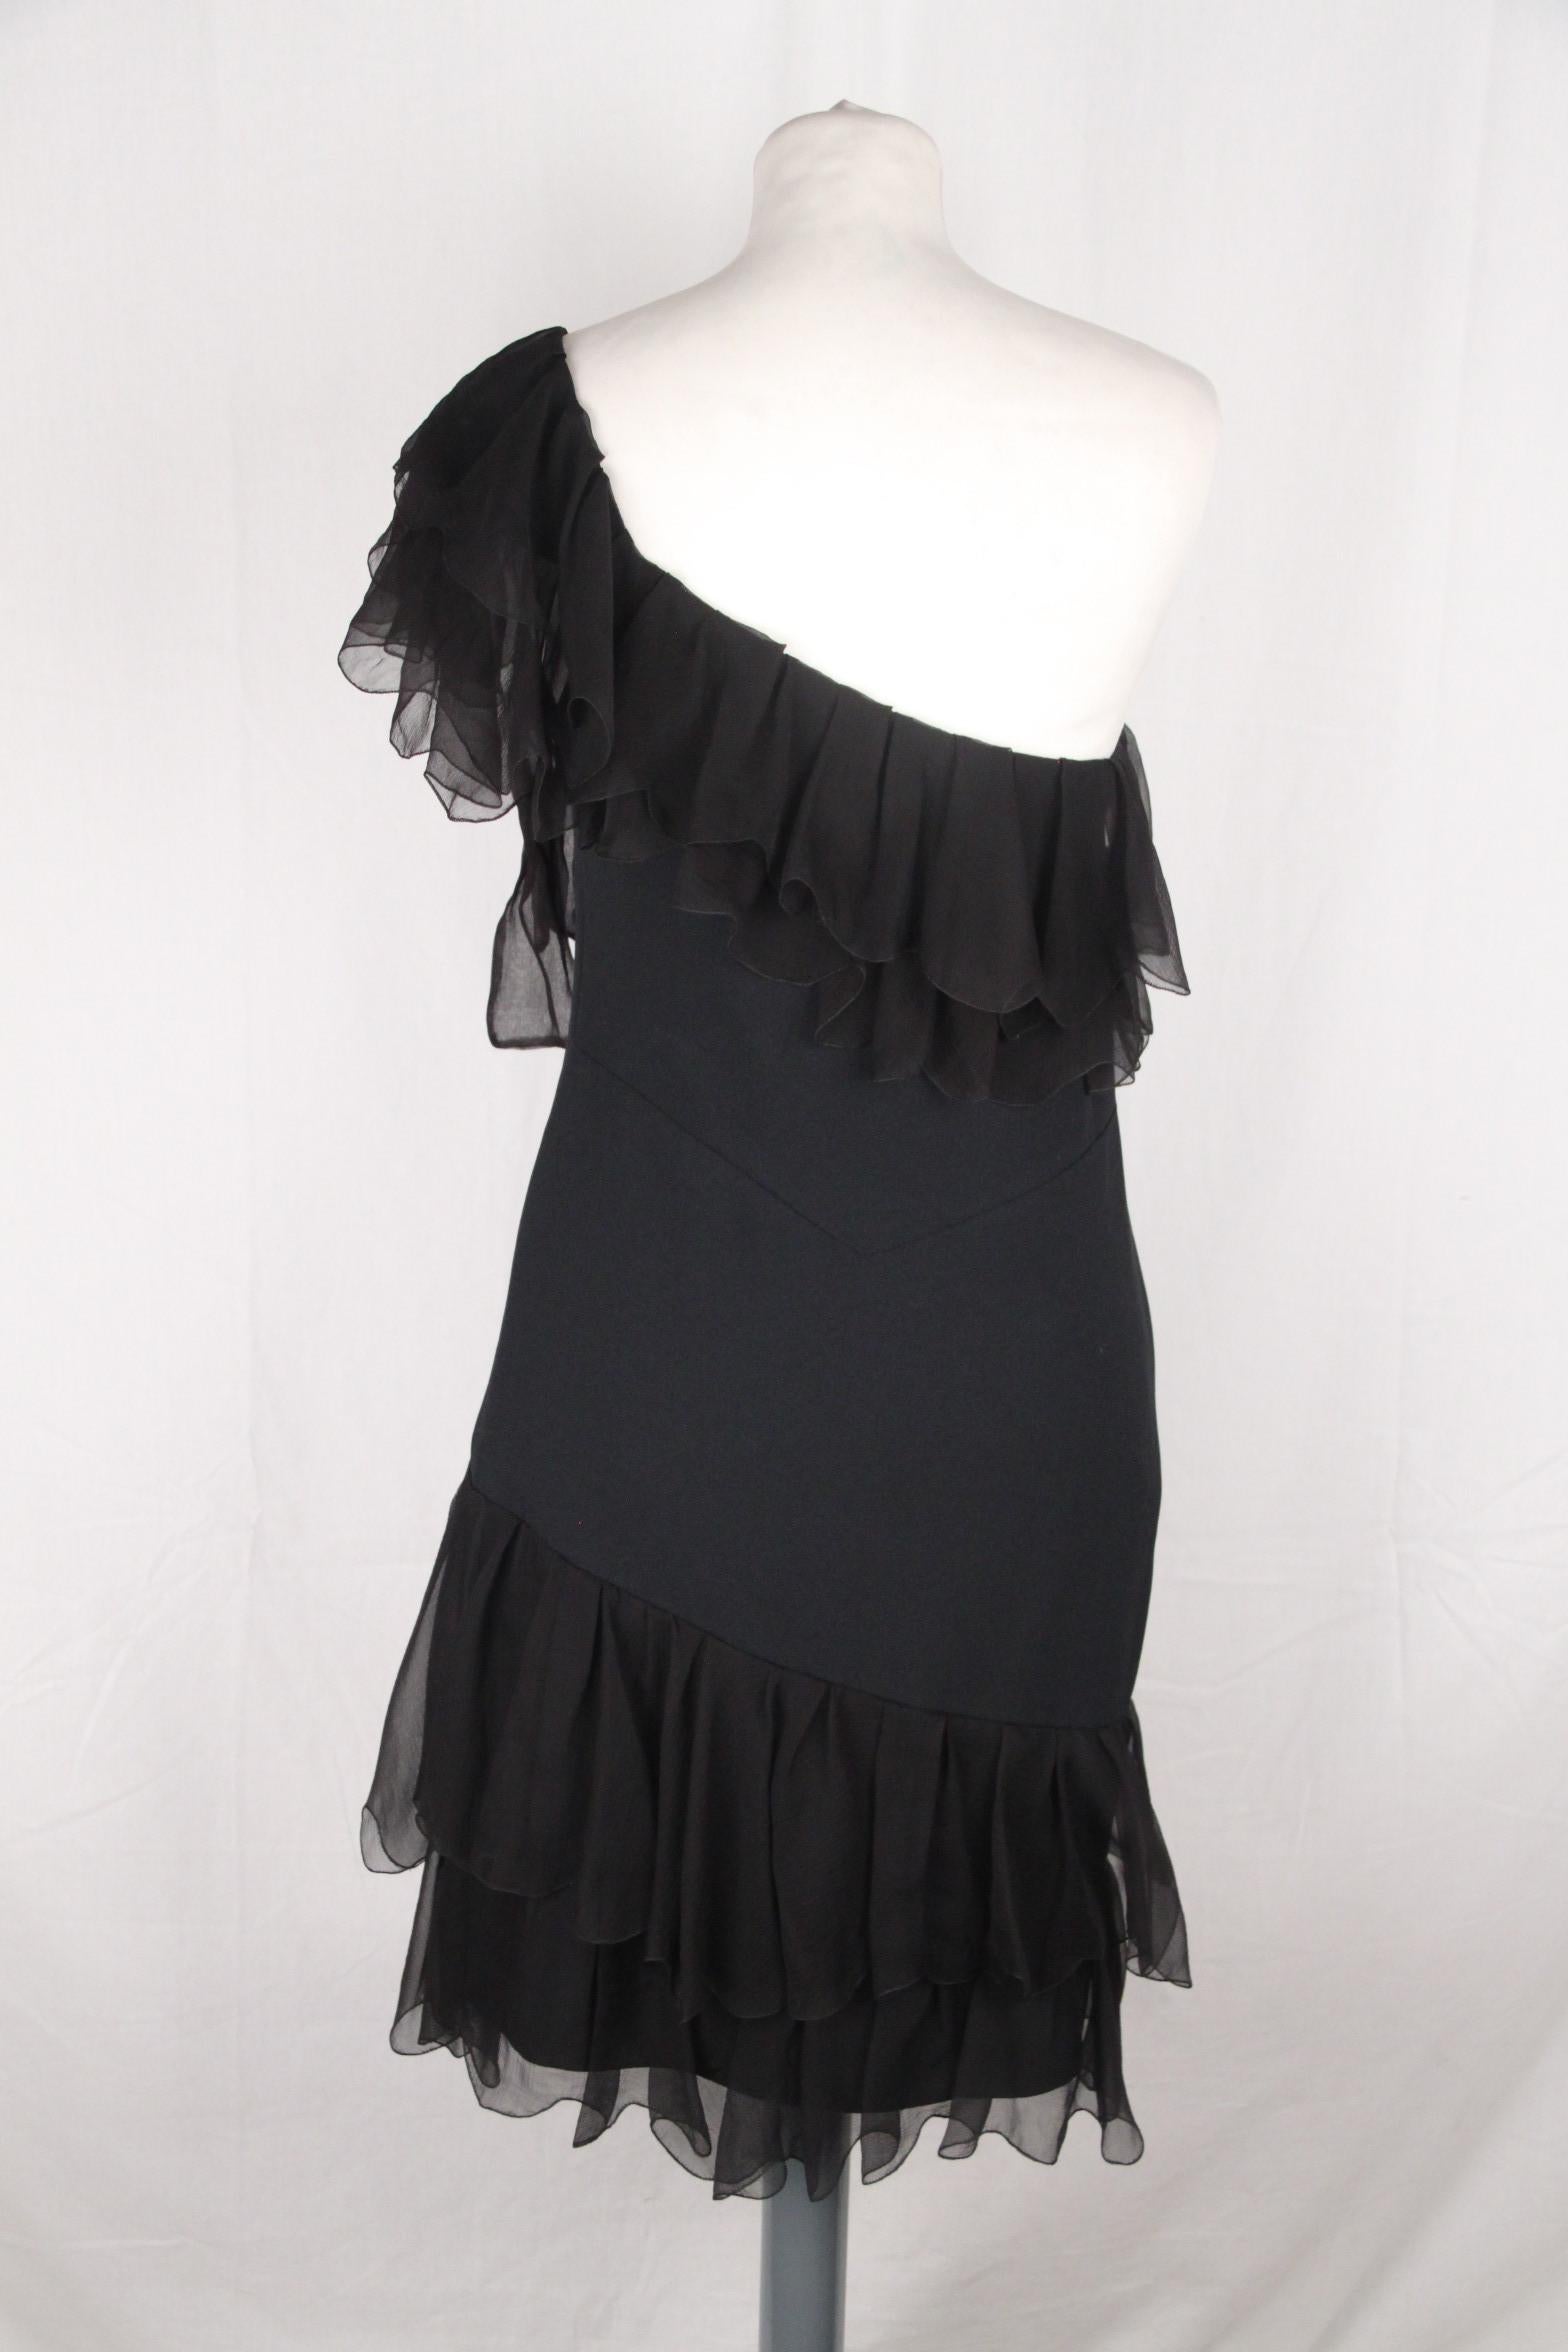 Women's Christian Dior Black One Shoulder Dress with Ruffles Size 4